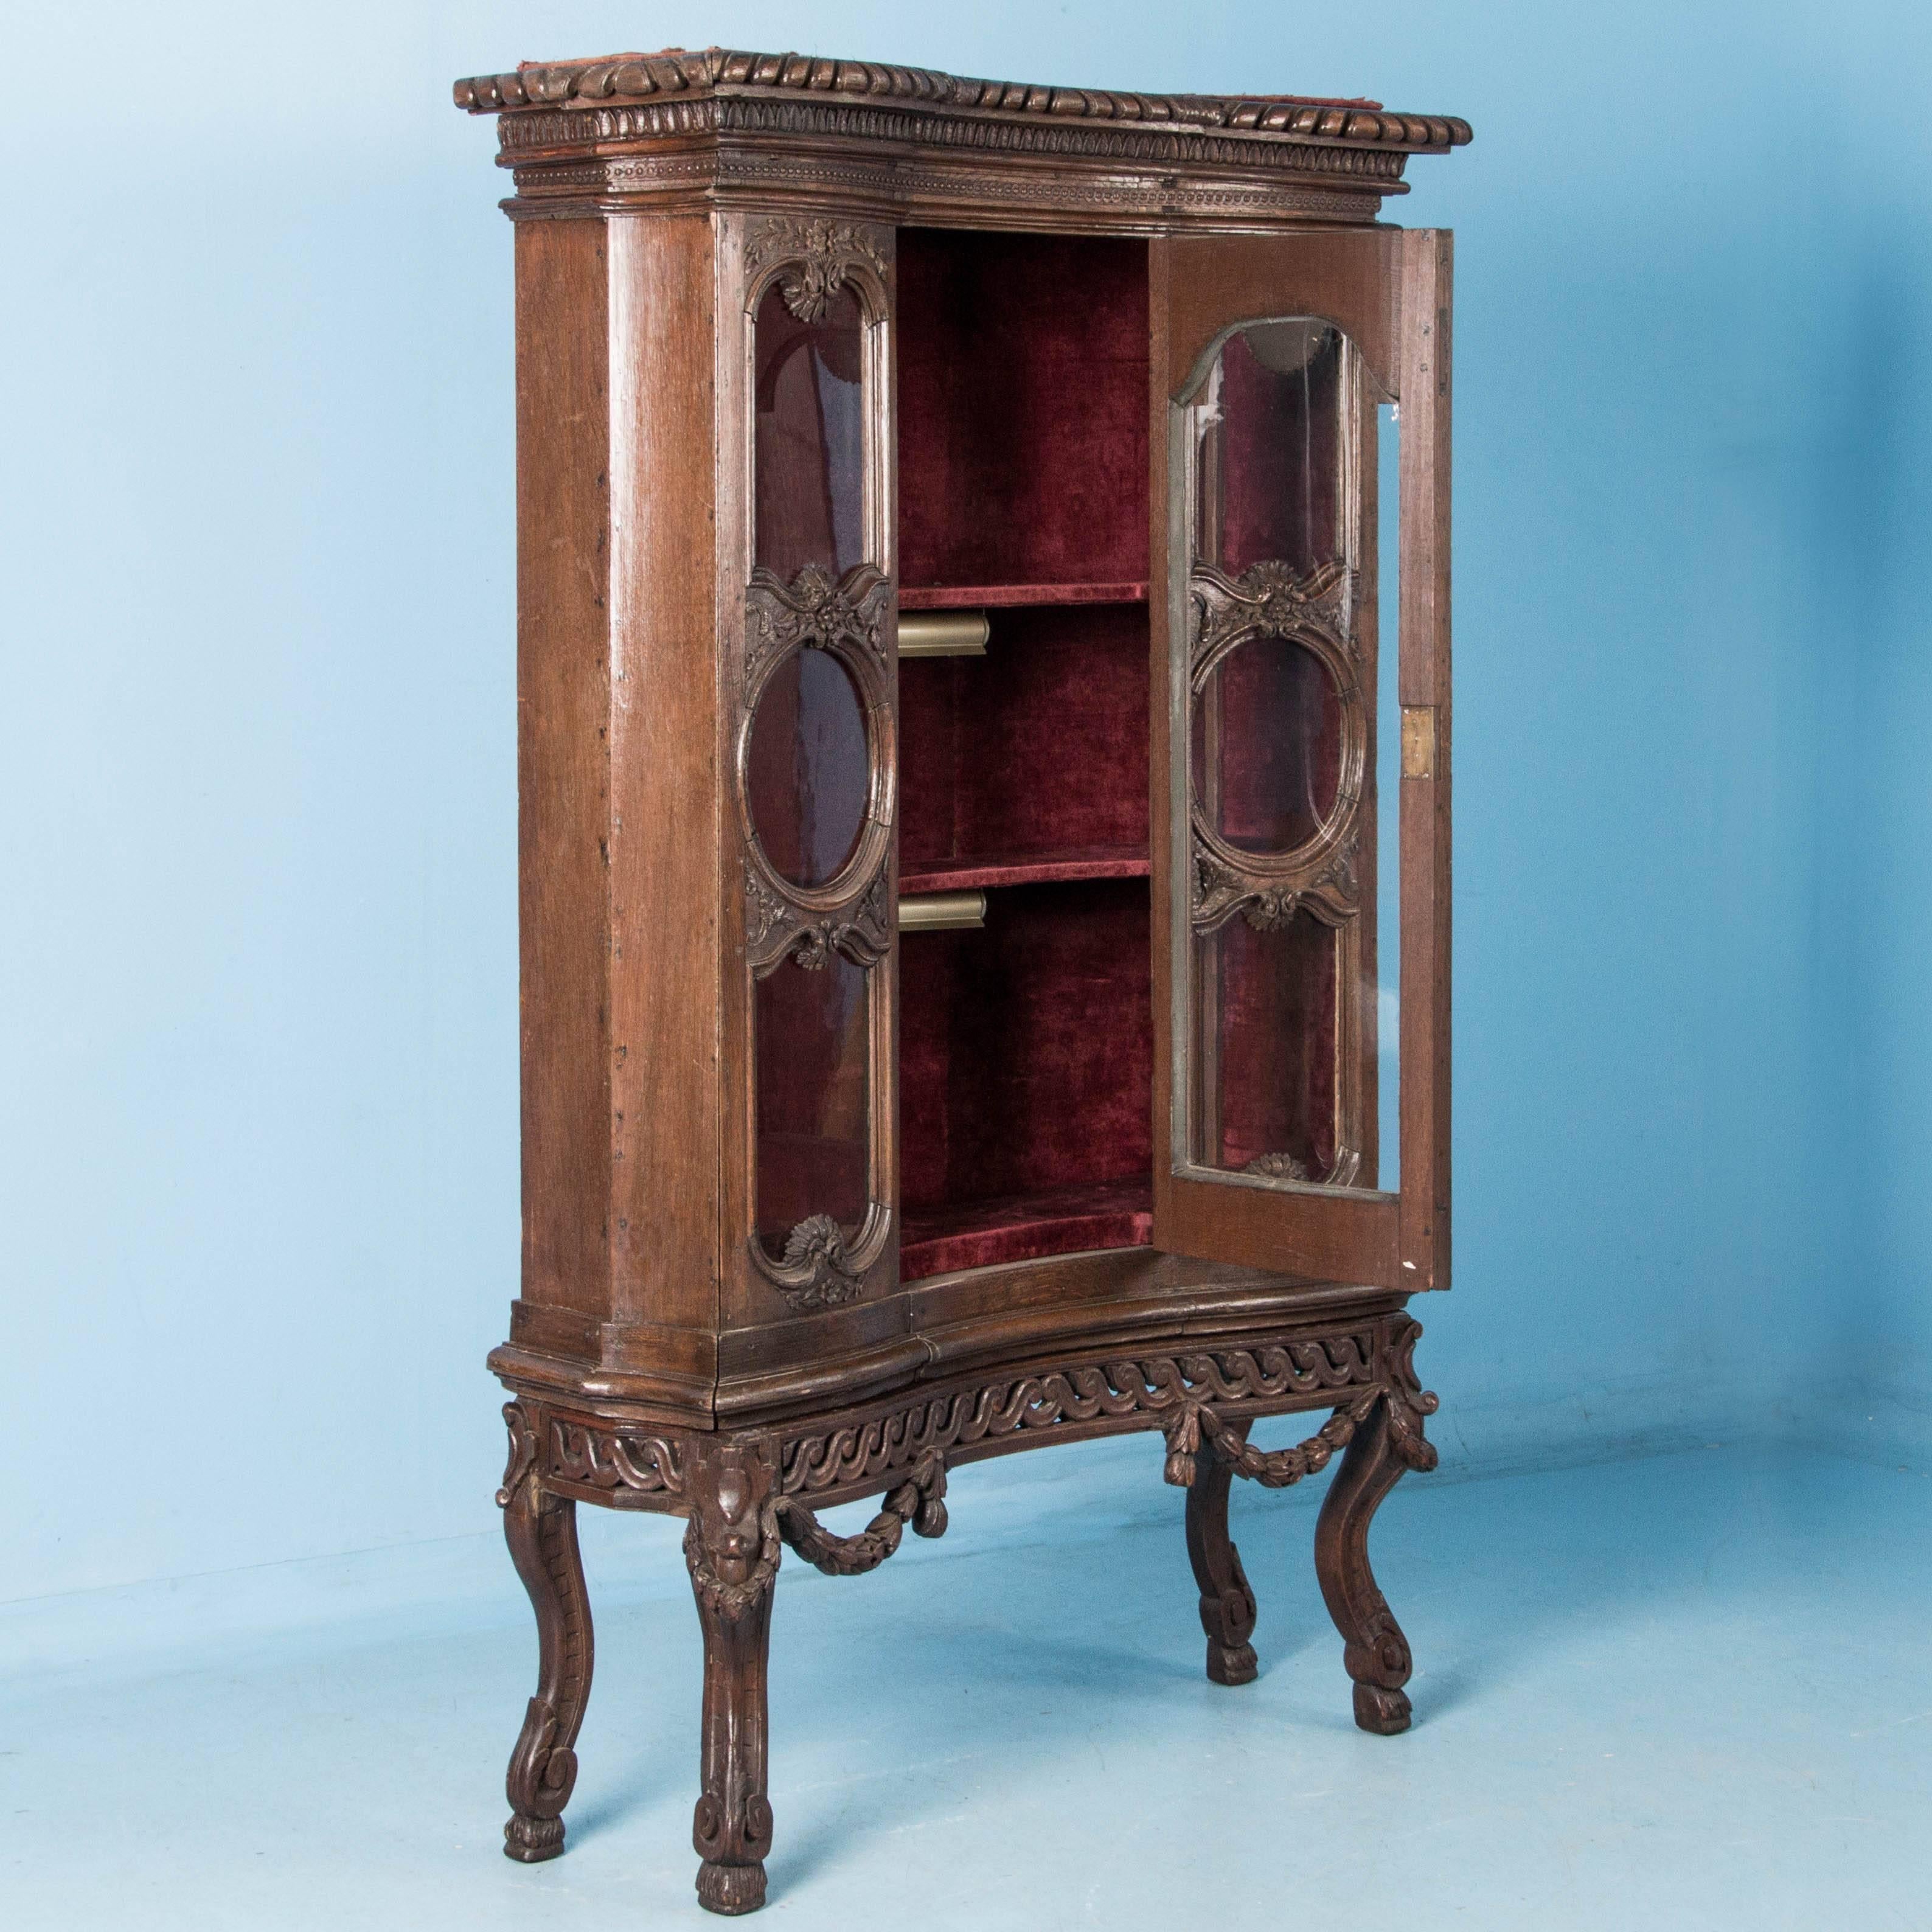 Oak china cabinet made in two parts, with a single concave glass door flanked by three glass panels. Each of the three panels and door on the upper cabinet are accented by carved molding. The case rests on a heavily carved base with four curved and